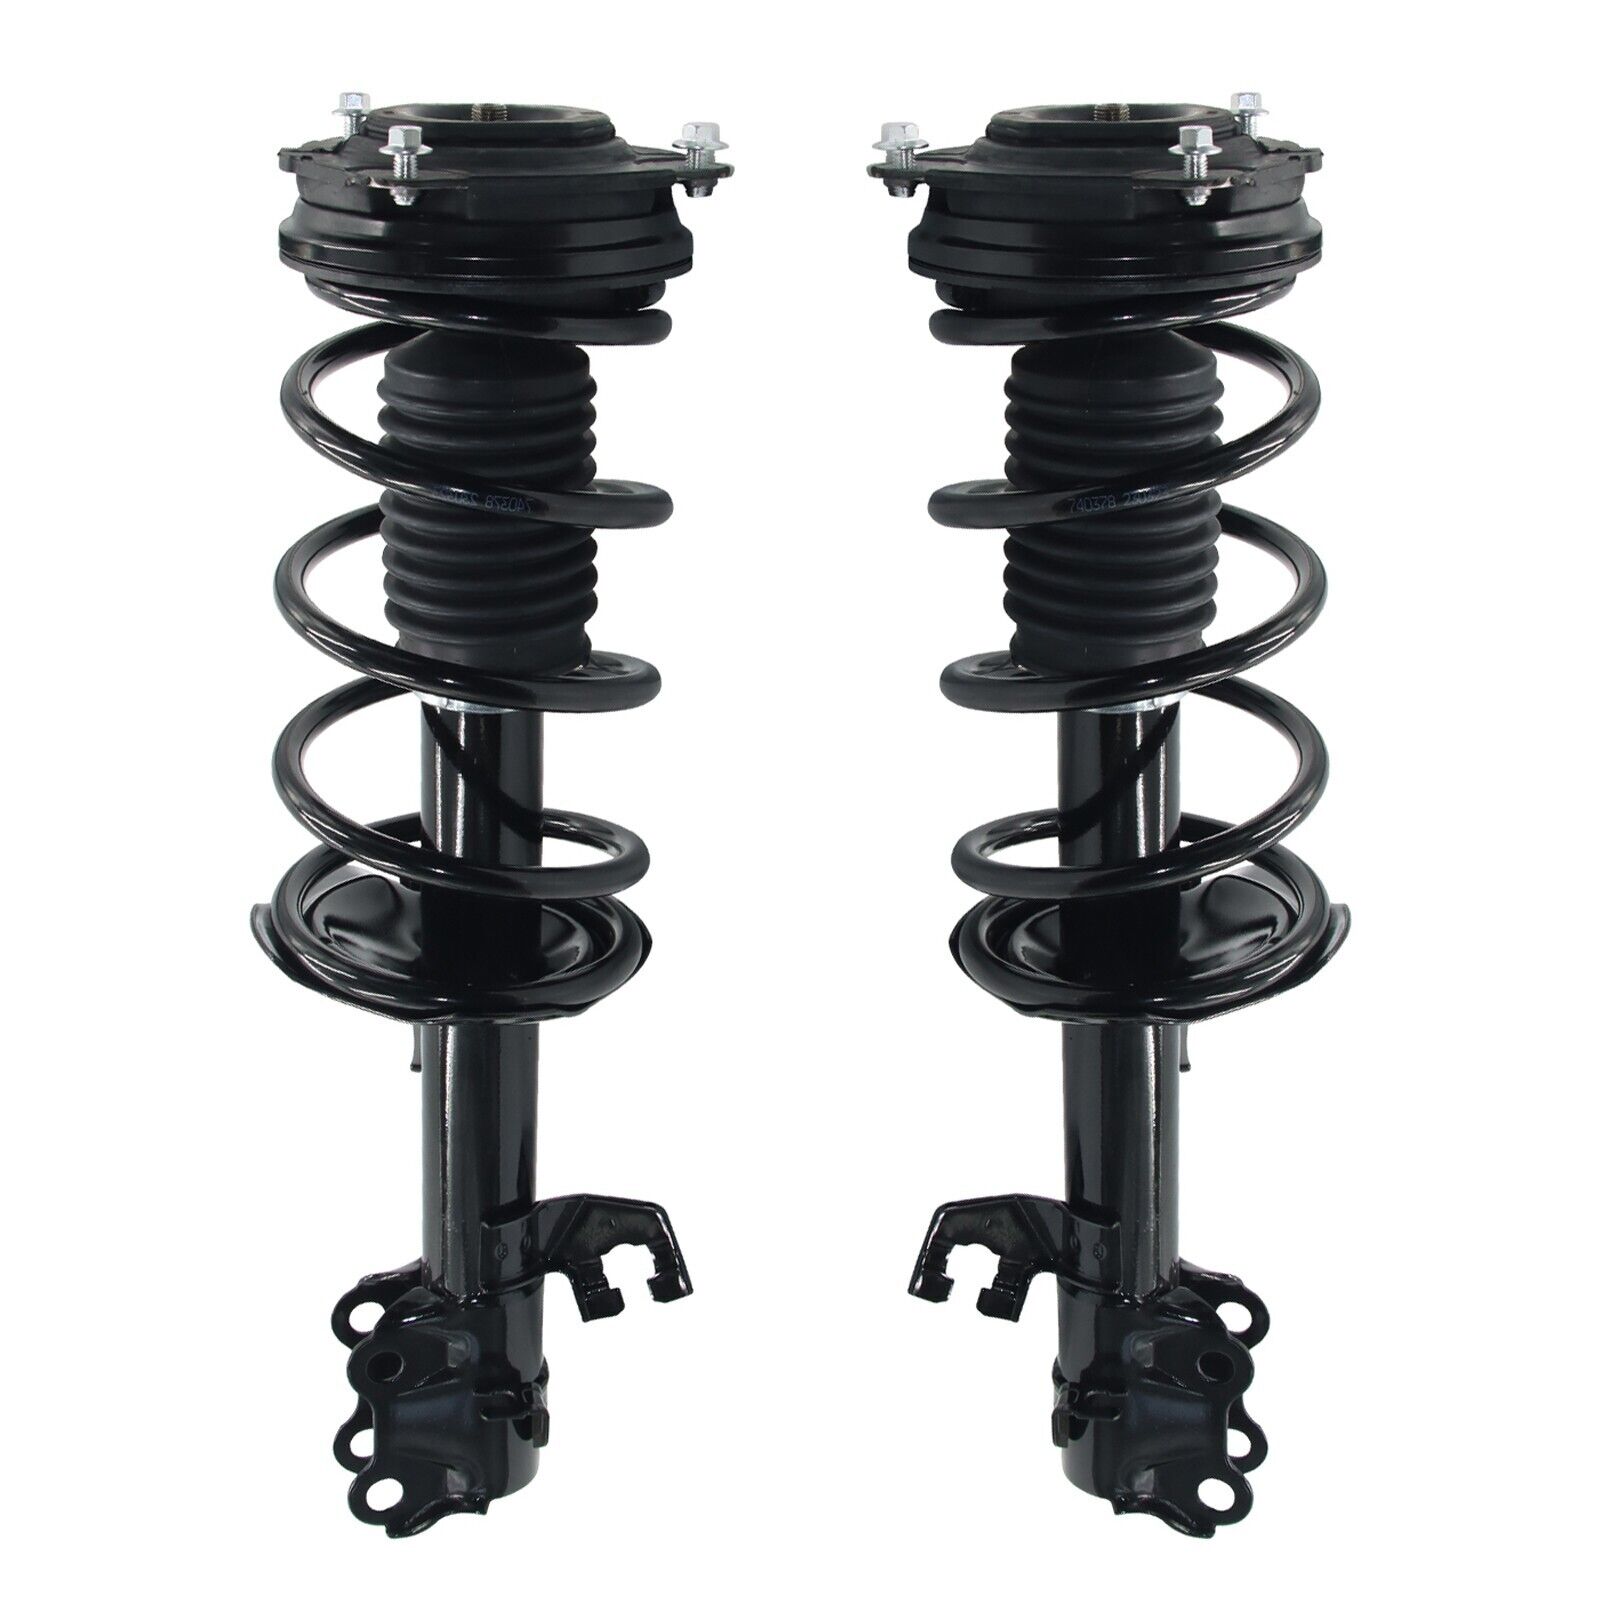 2X Front Struts w/ Coil Spring For 2009-2014 Nissan Cube 2007-2012 Nissan Versa